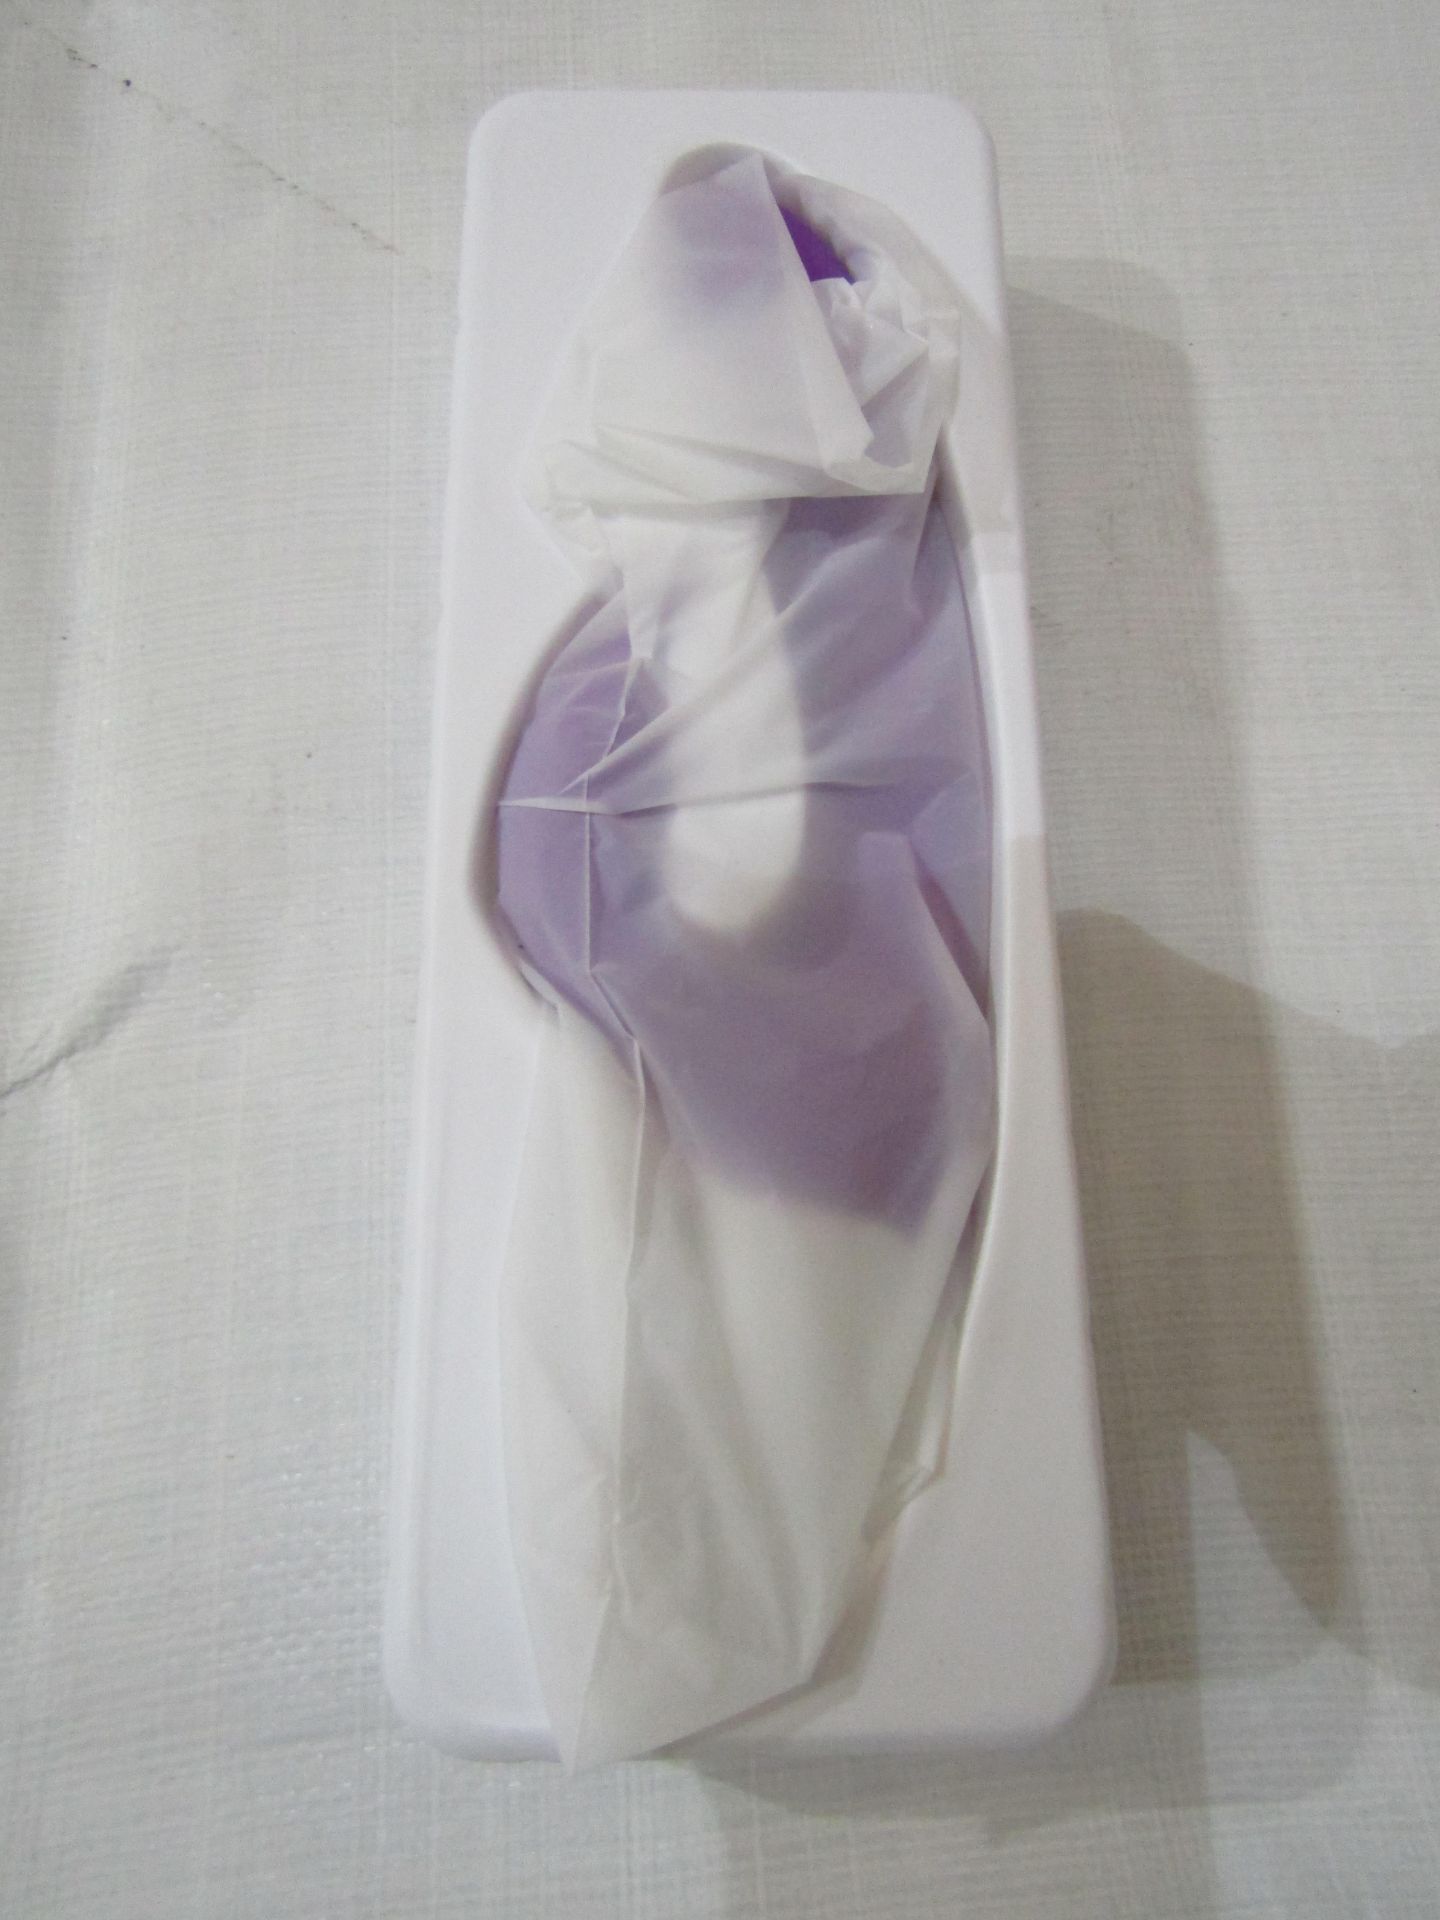 Soft Silicone Dildo With Clit Vibrator - New & Packaged.